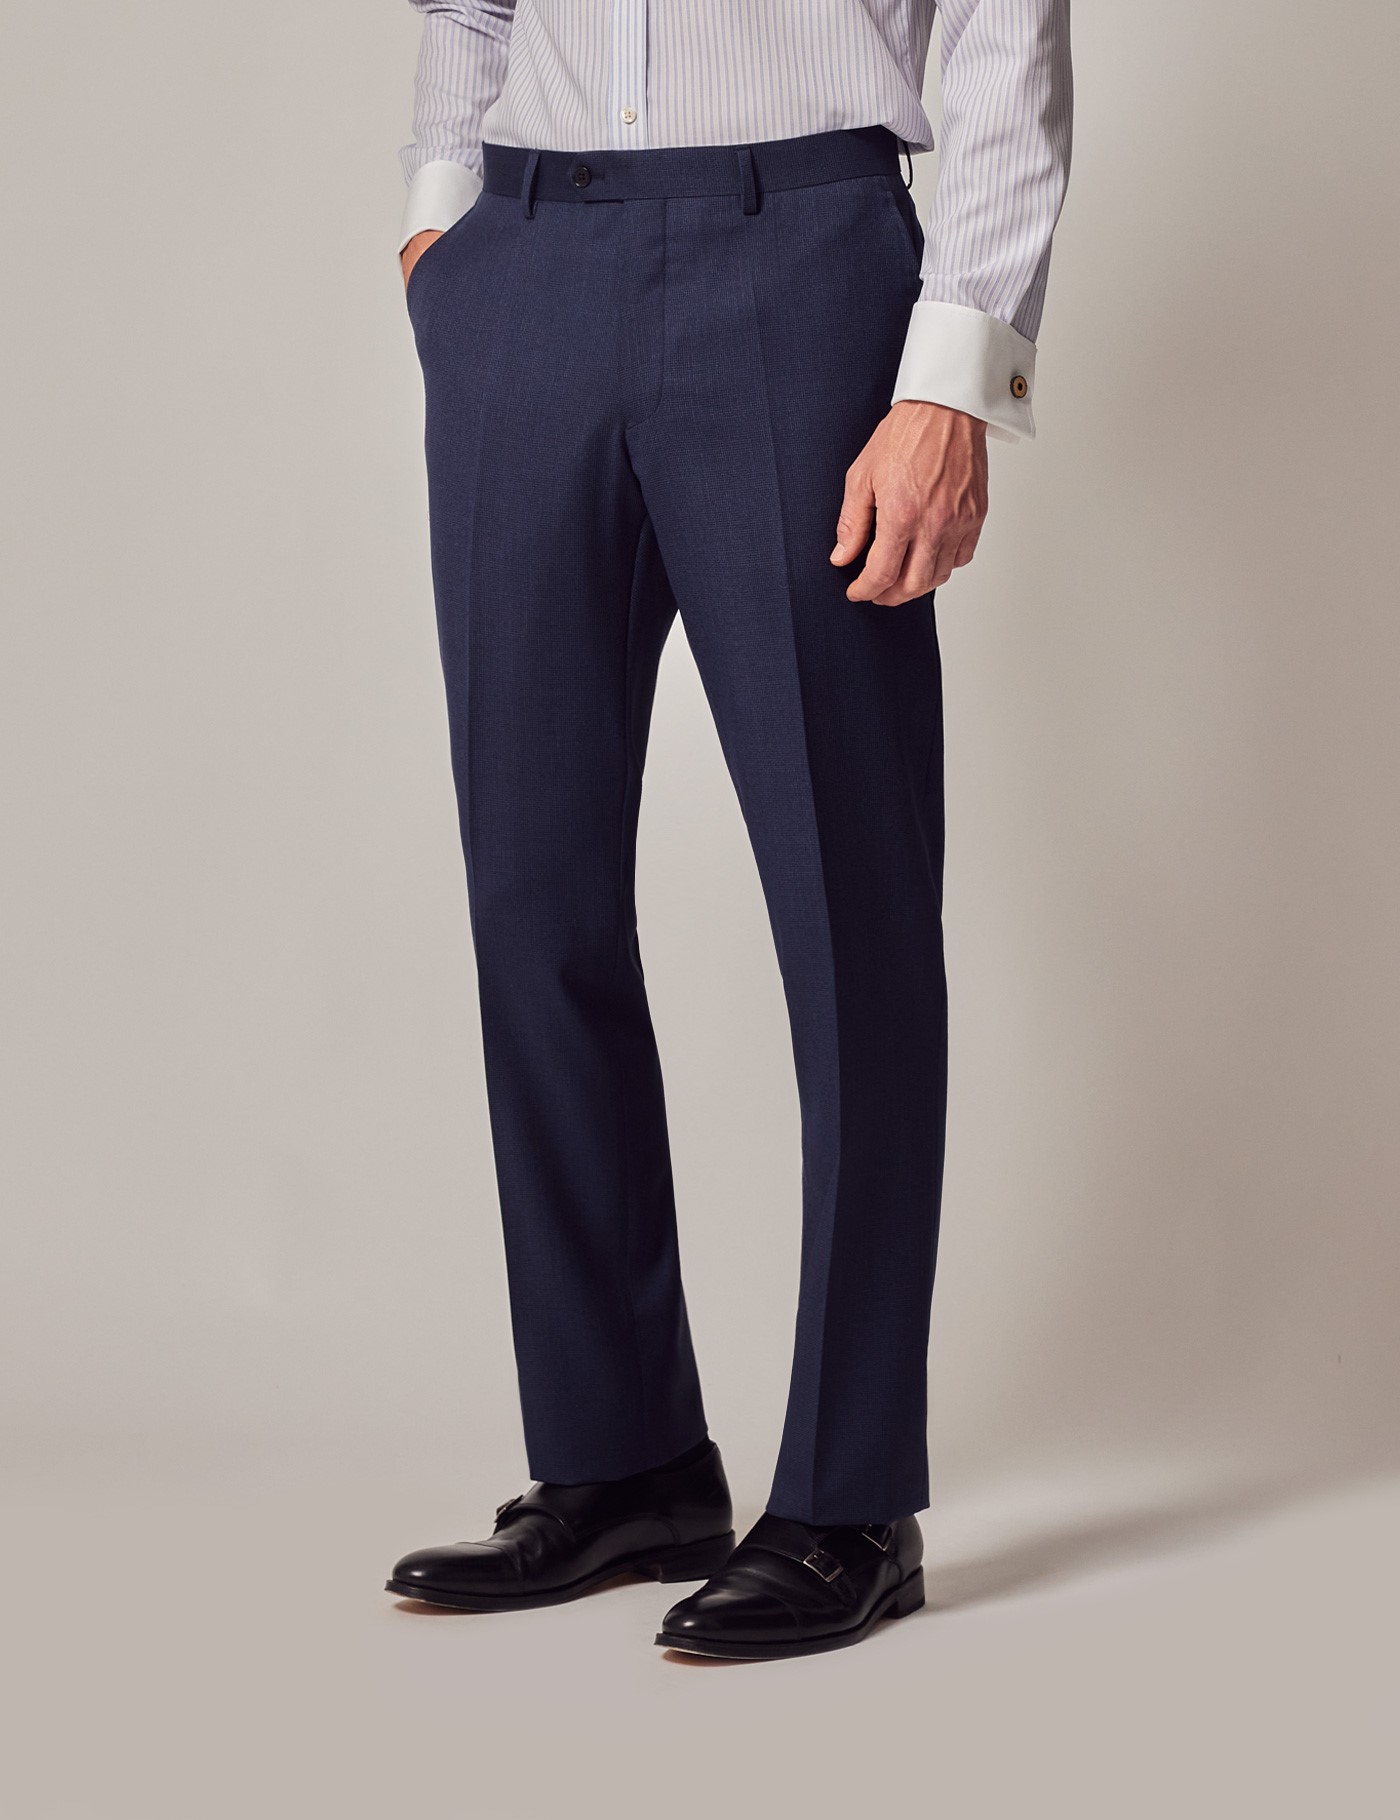 Canali - Slim-Fit Satin-Trimmed Wool Tuxedo Trousers - Blue Canali